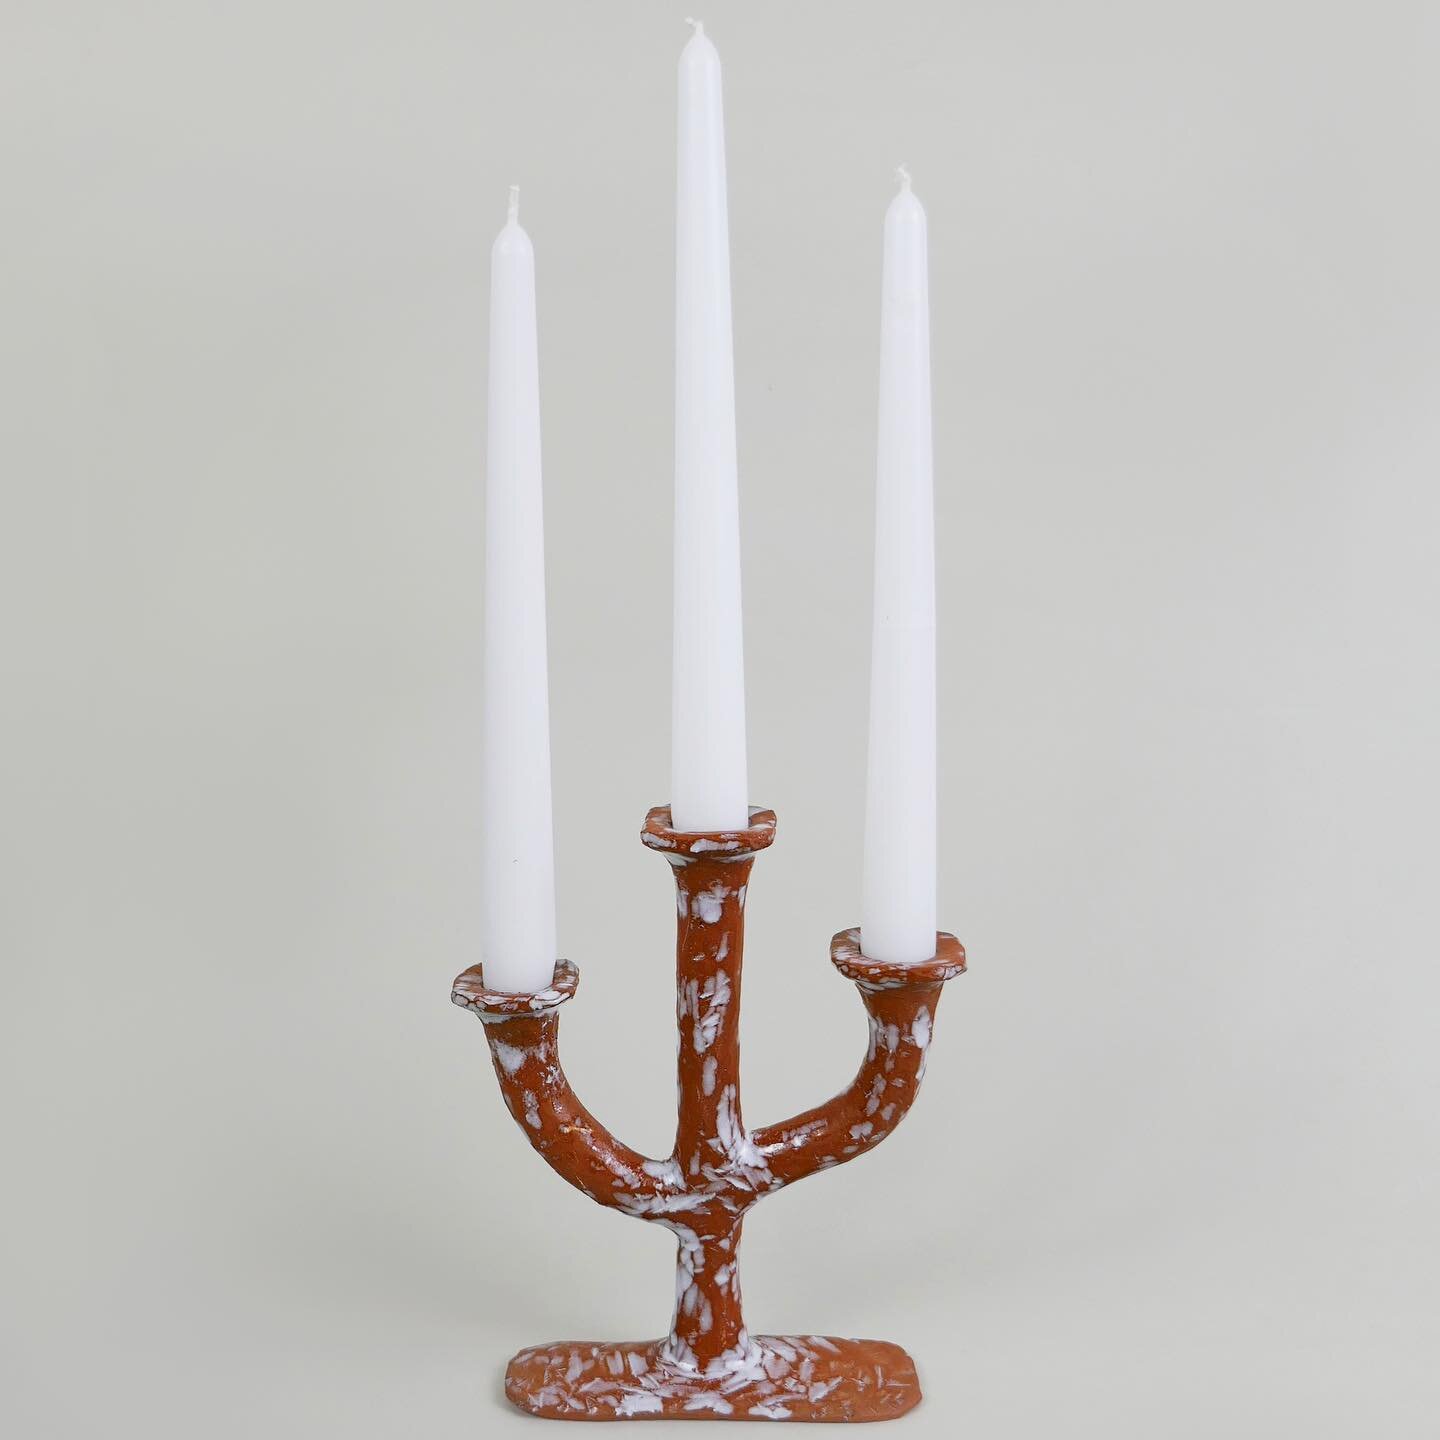 Pop-up shop!
Next weekend (2/3 December), I&rsquo;ll be taking over the @yodomo.co Circular Hub at Hackney City Farm.
I&rsquo;ll be selling this carved terracotta candelabra and other candlesticks for Christmas/Hanukkah/impending winter power-cuts.
L